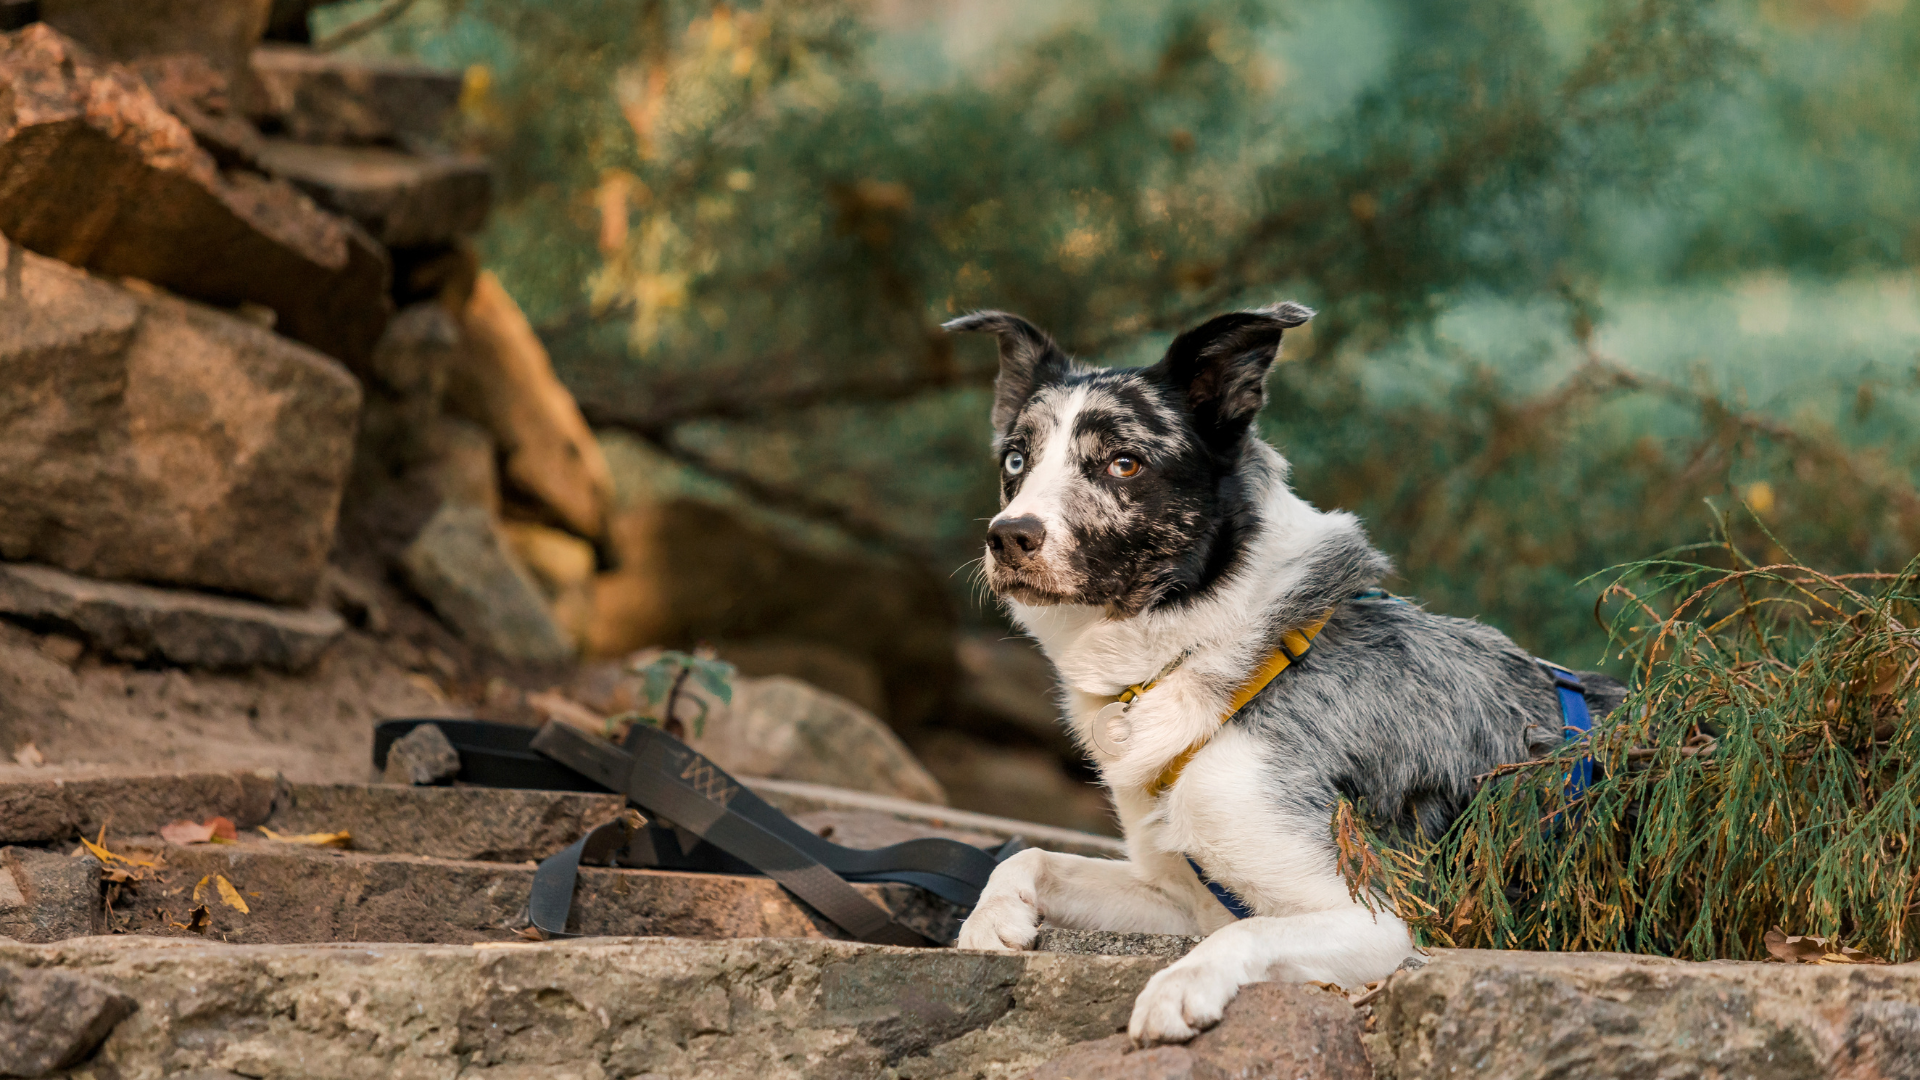 How to Protect Your Dog's Paws on Rocky Trails